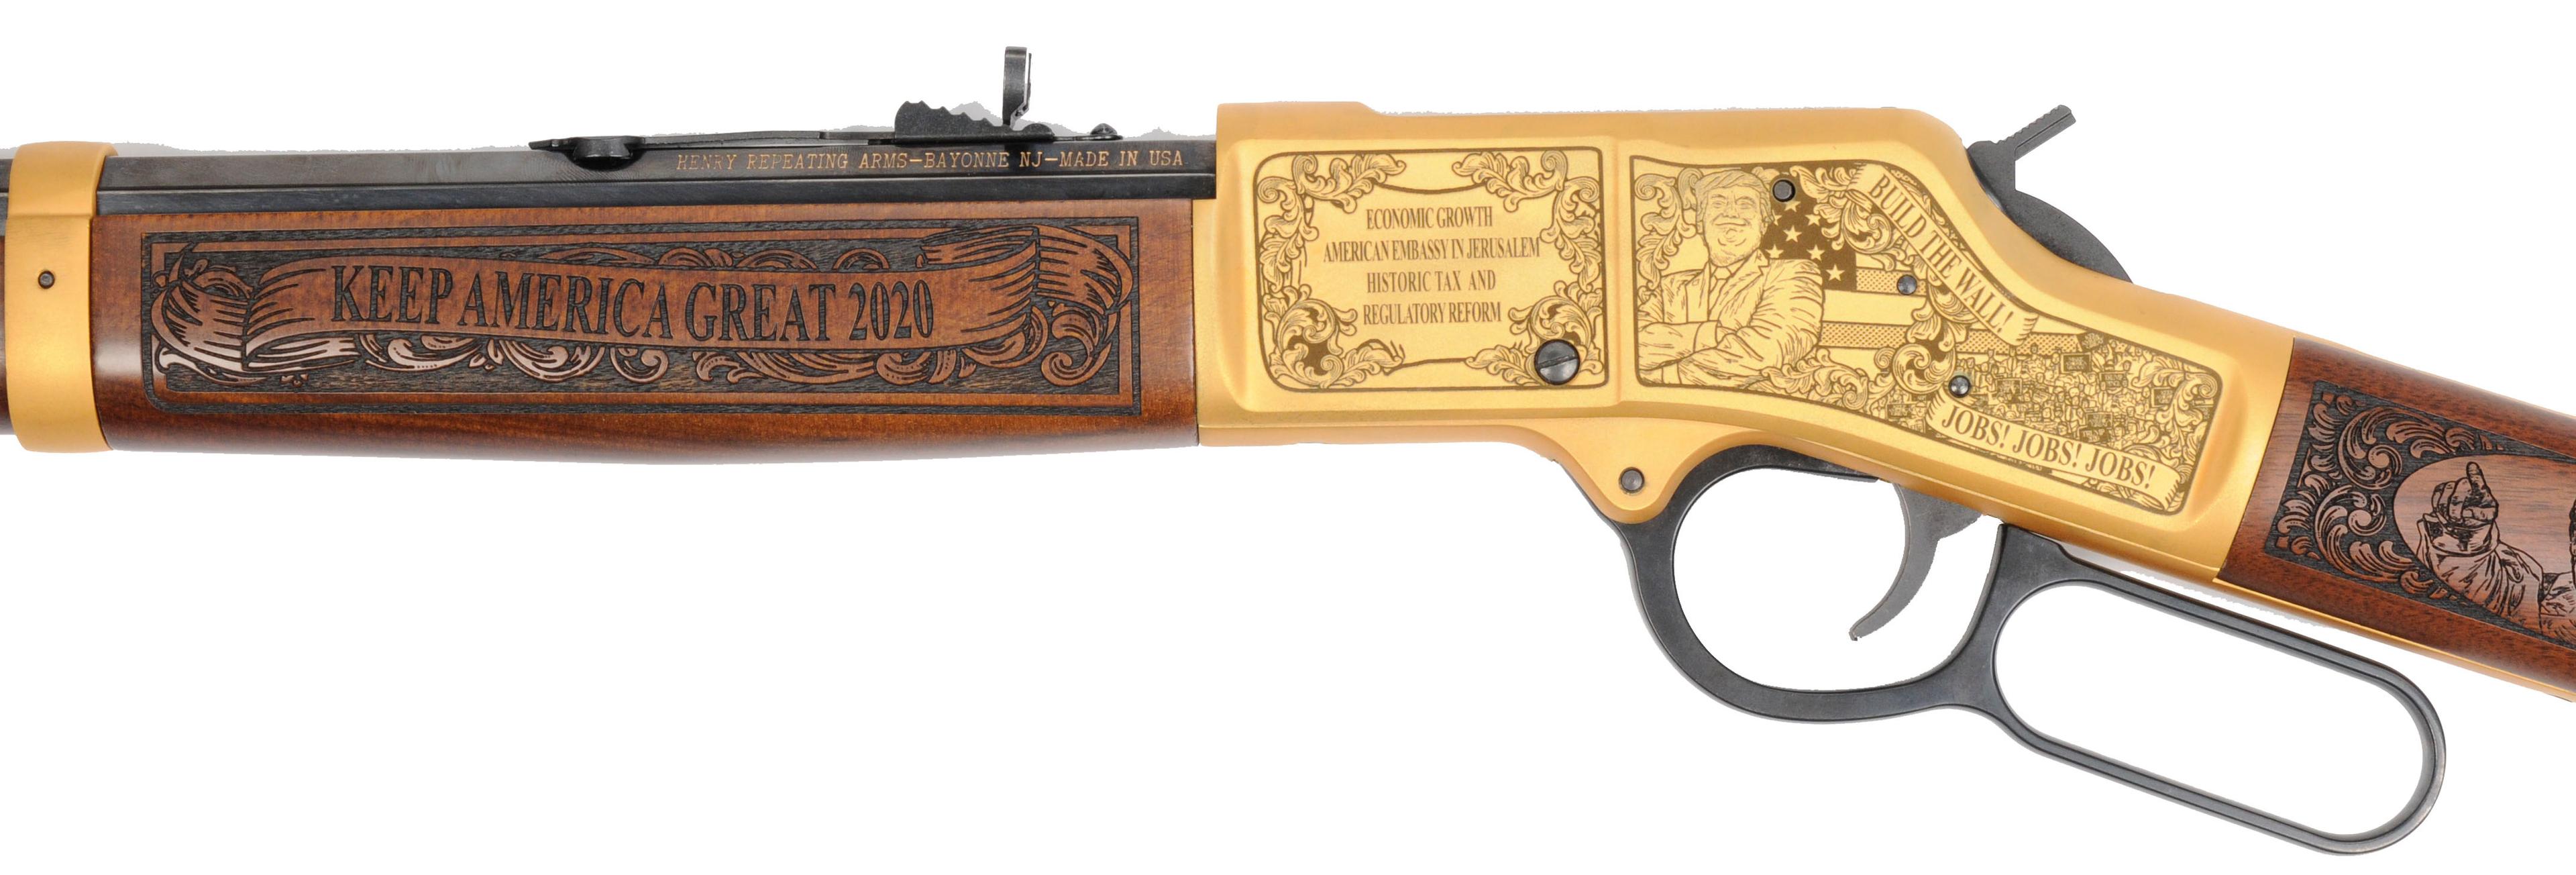 Special Limited-Edition Engraved Donald Trump Henry .45 Lever-Action Rifle - FFL # BB0074350C (MDA1)